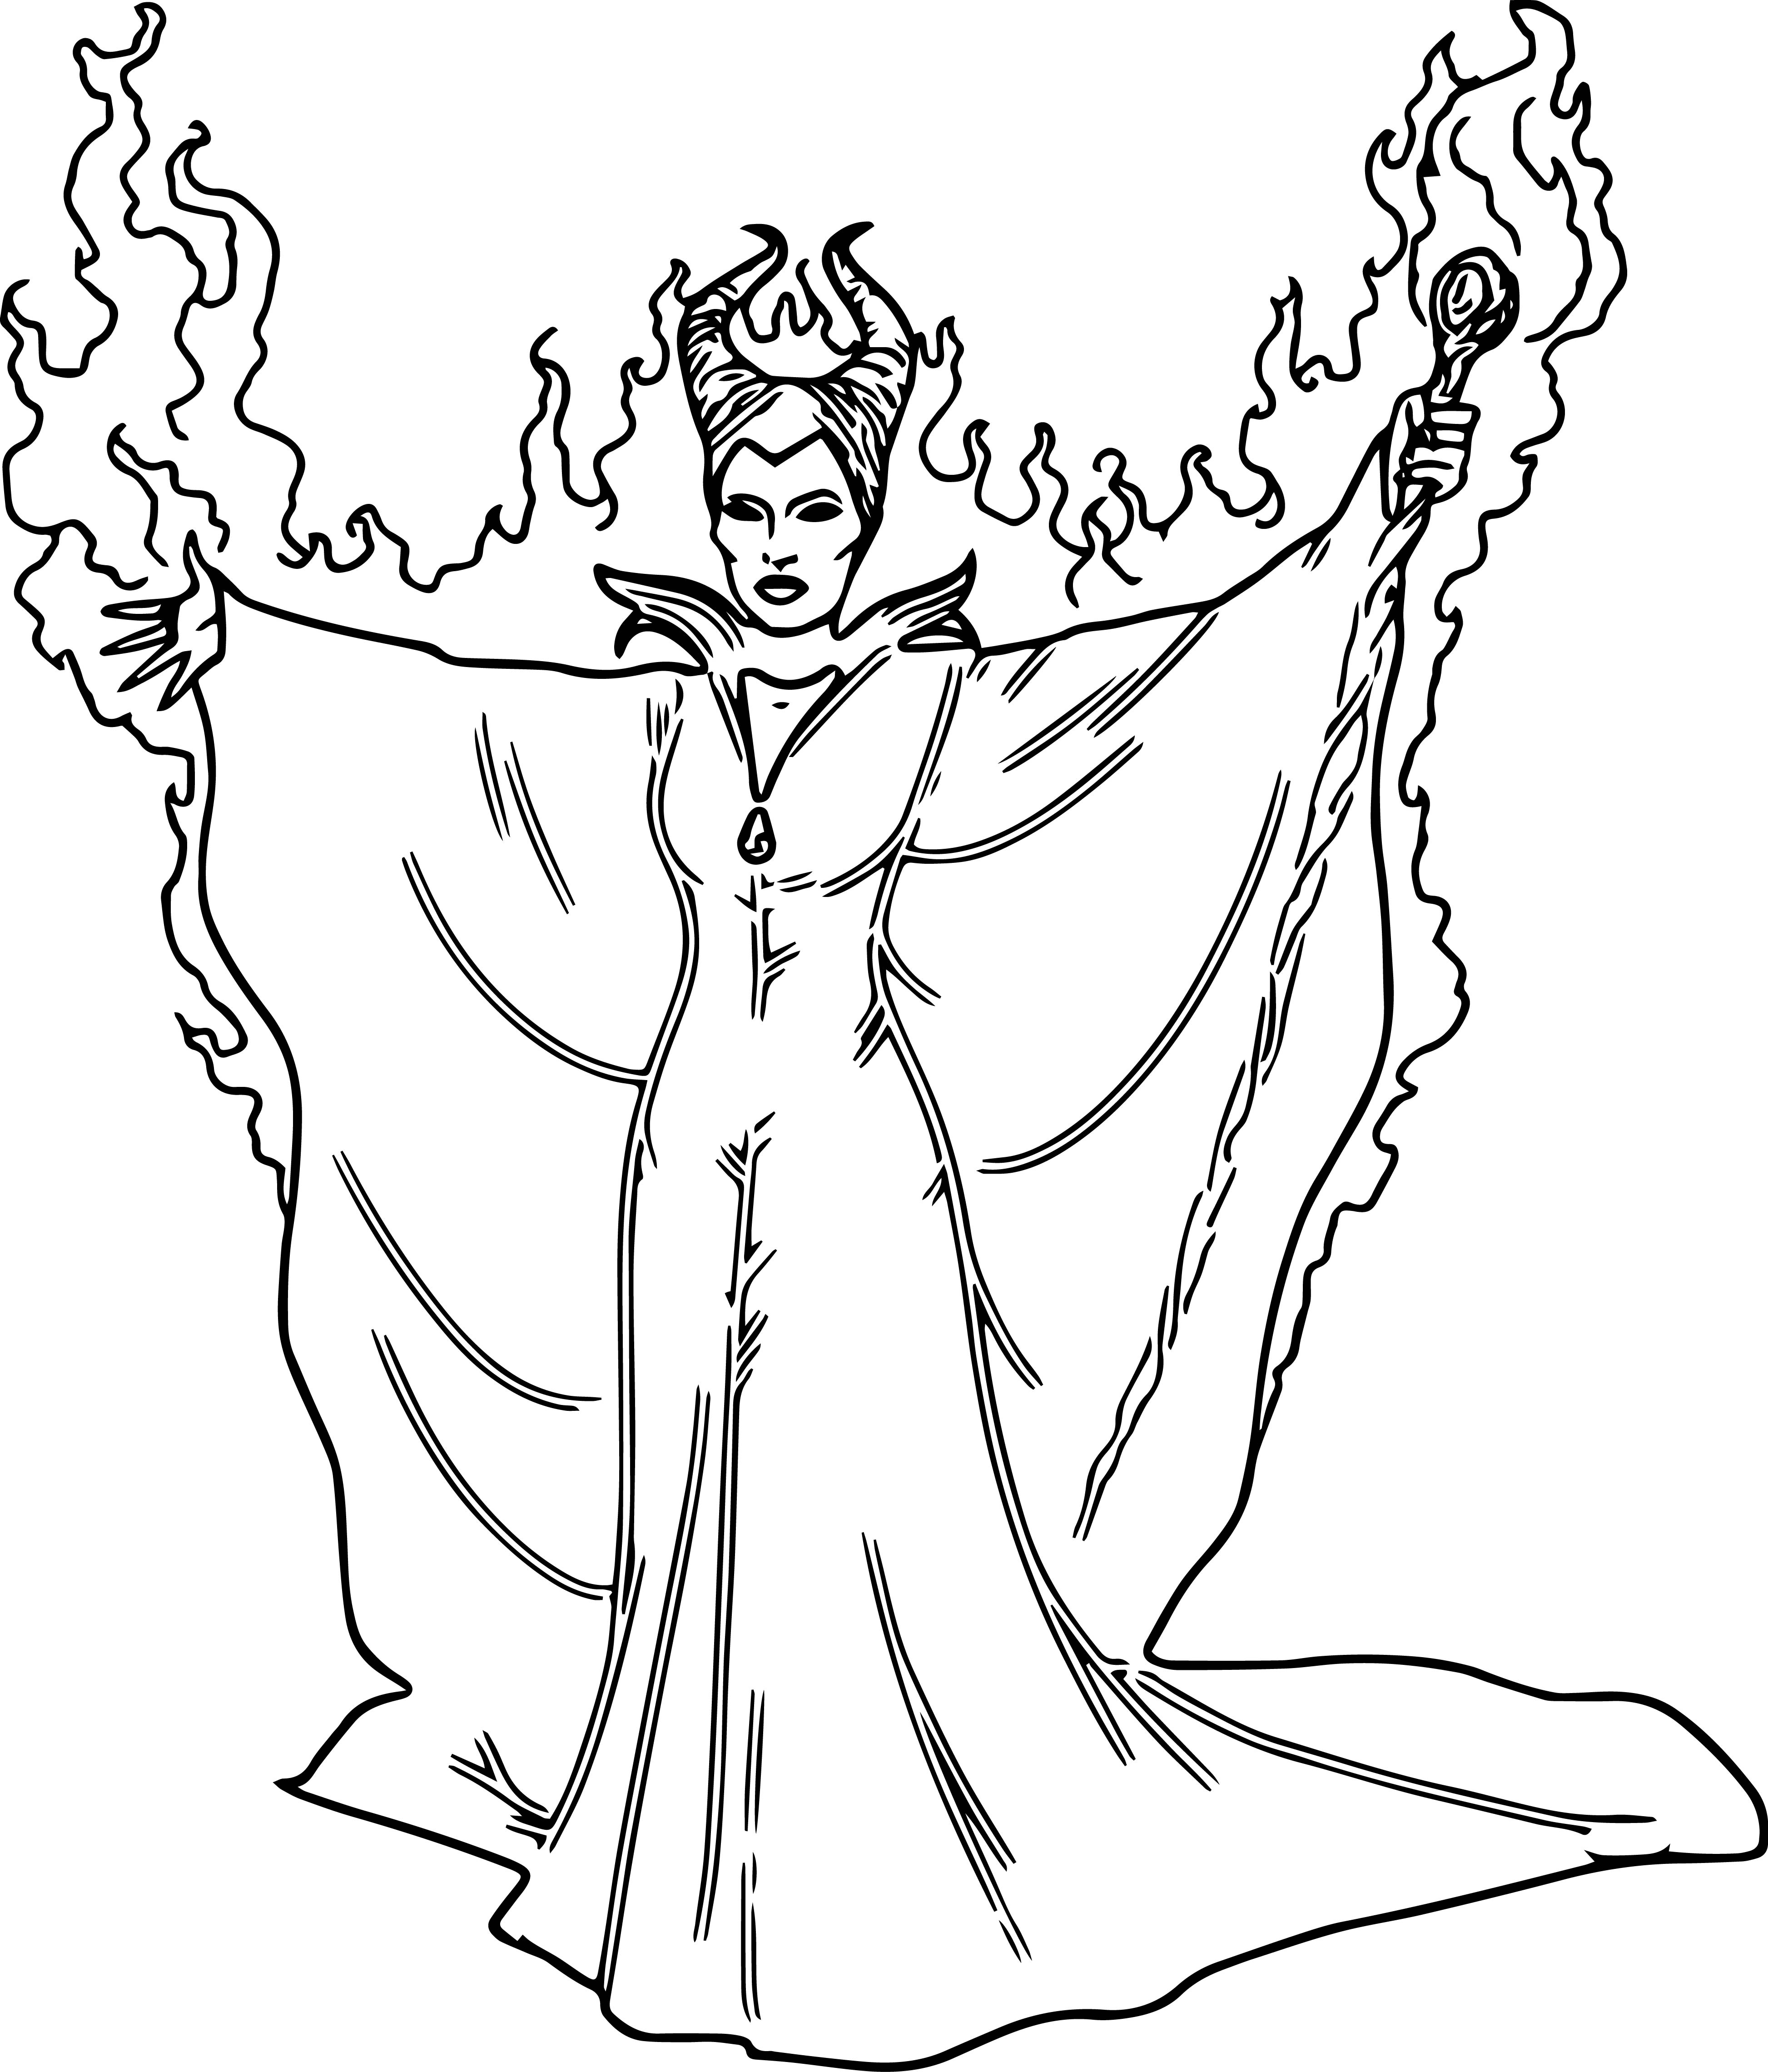 Maleficent 29 For Kids Coloring Page